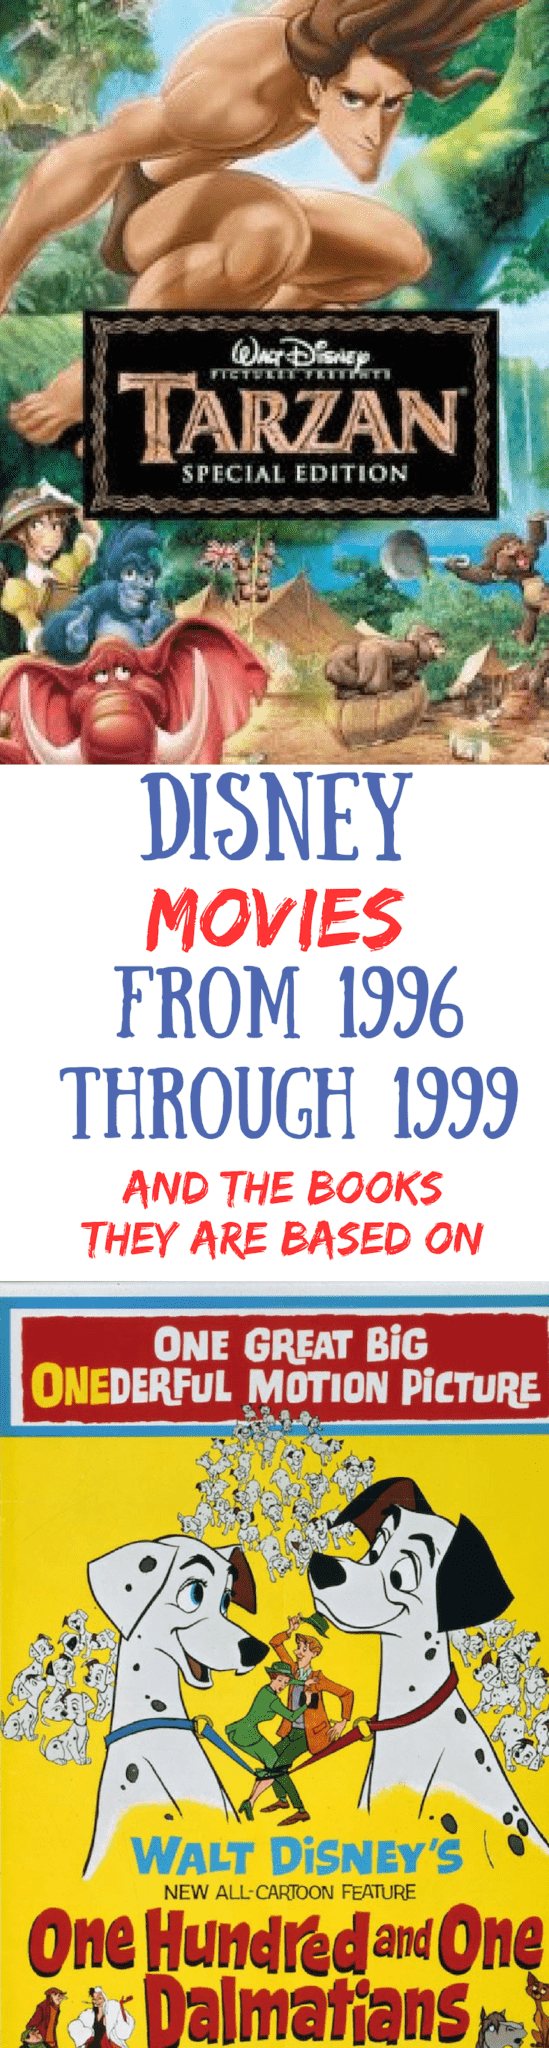 Disney Movie List in Chronological Order and the Books they are based on